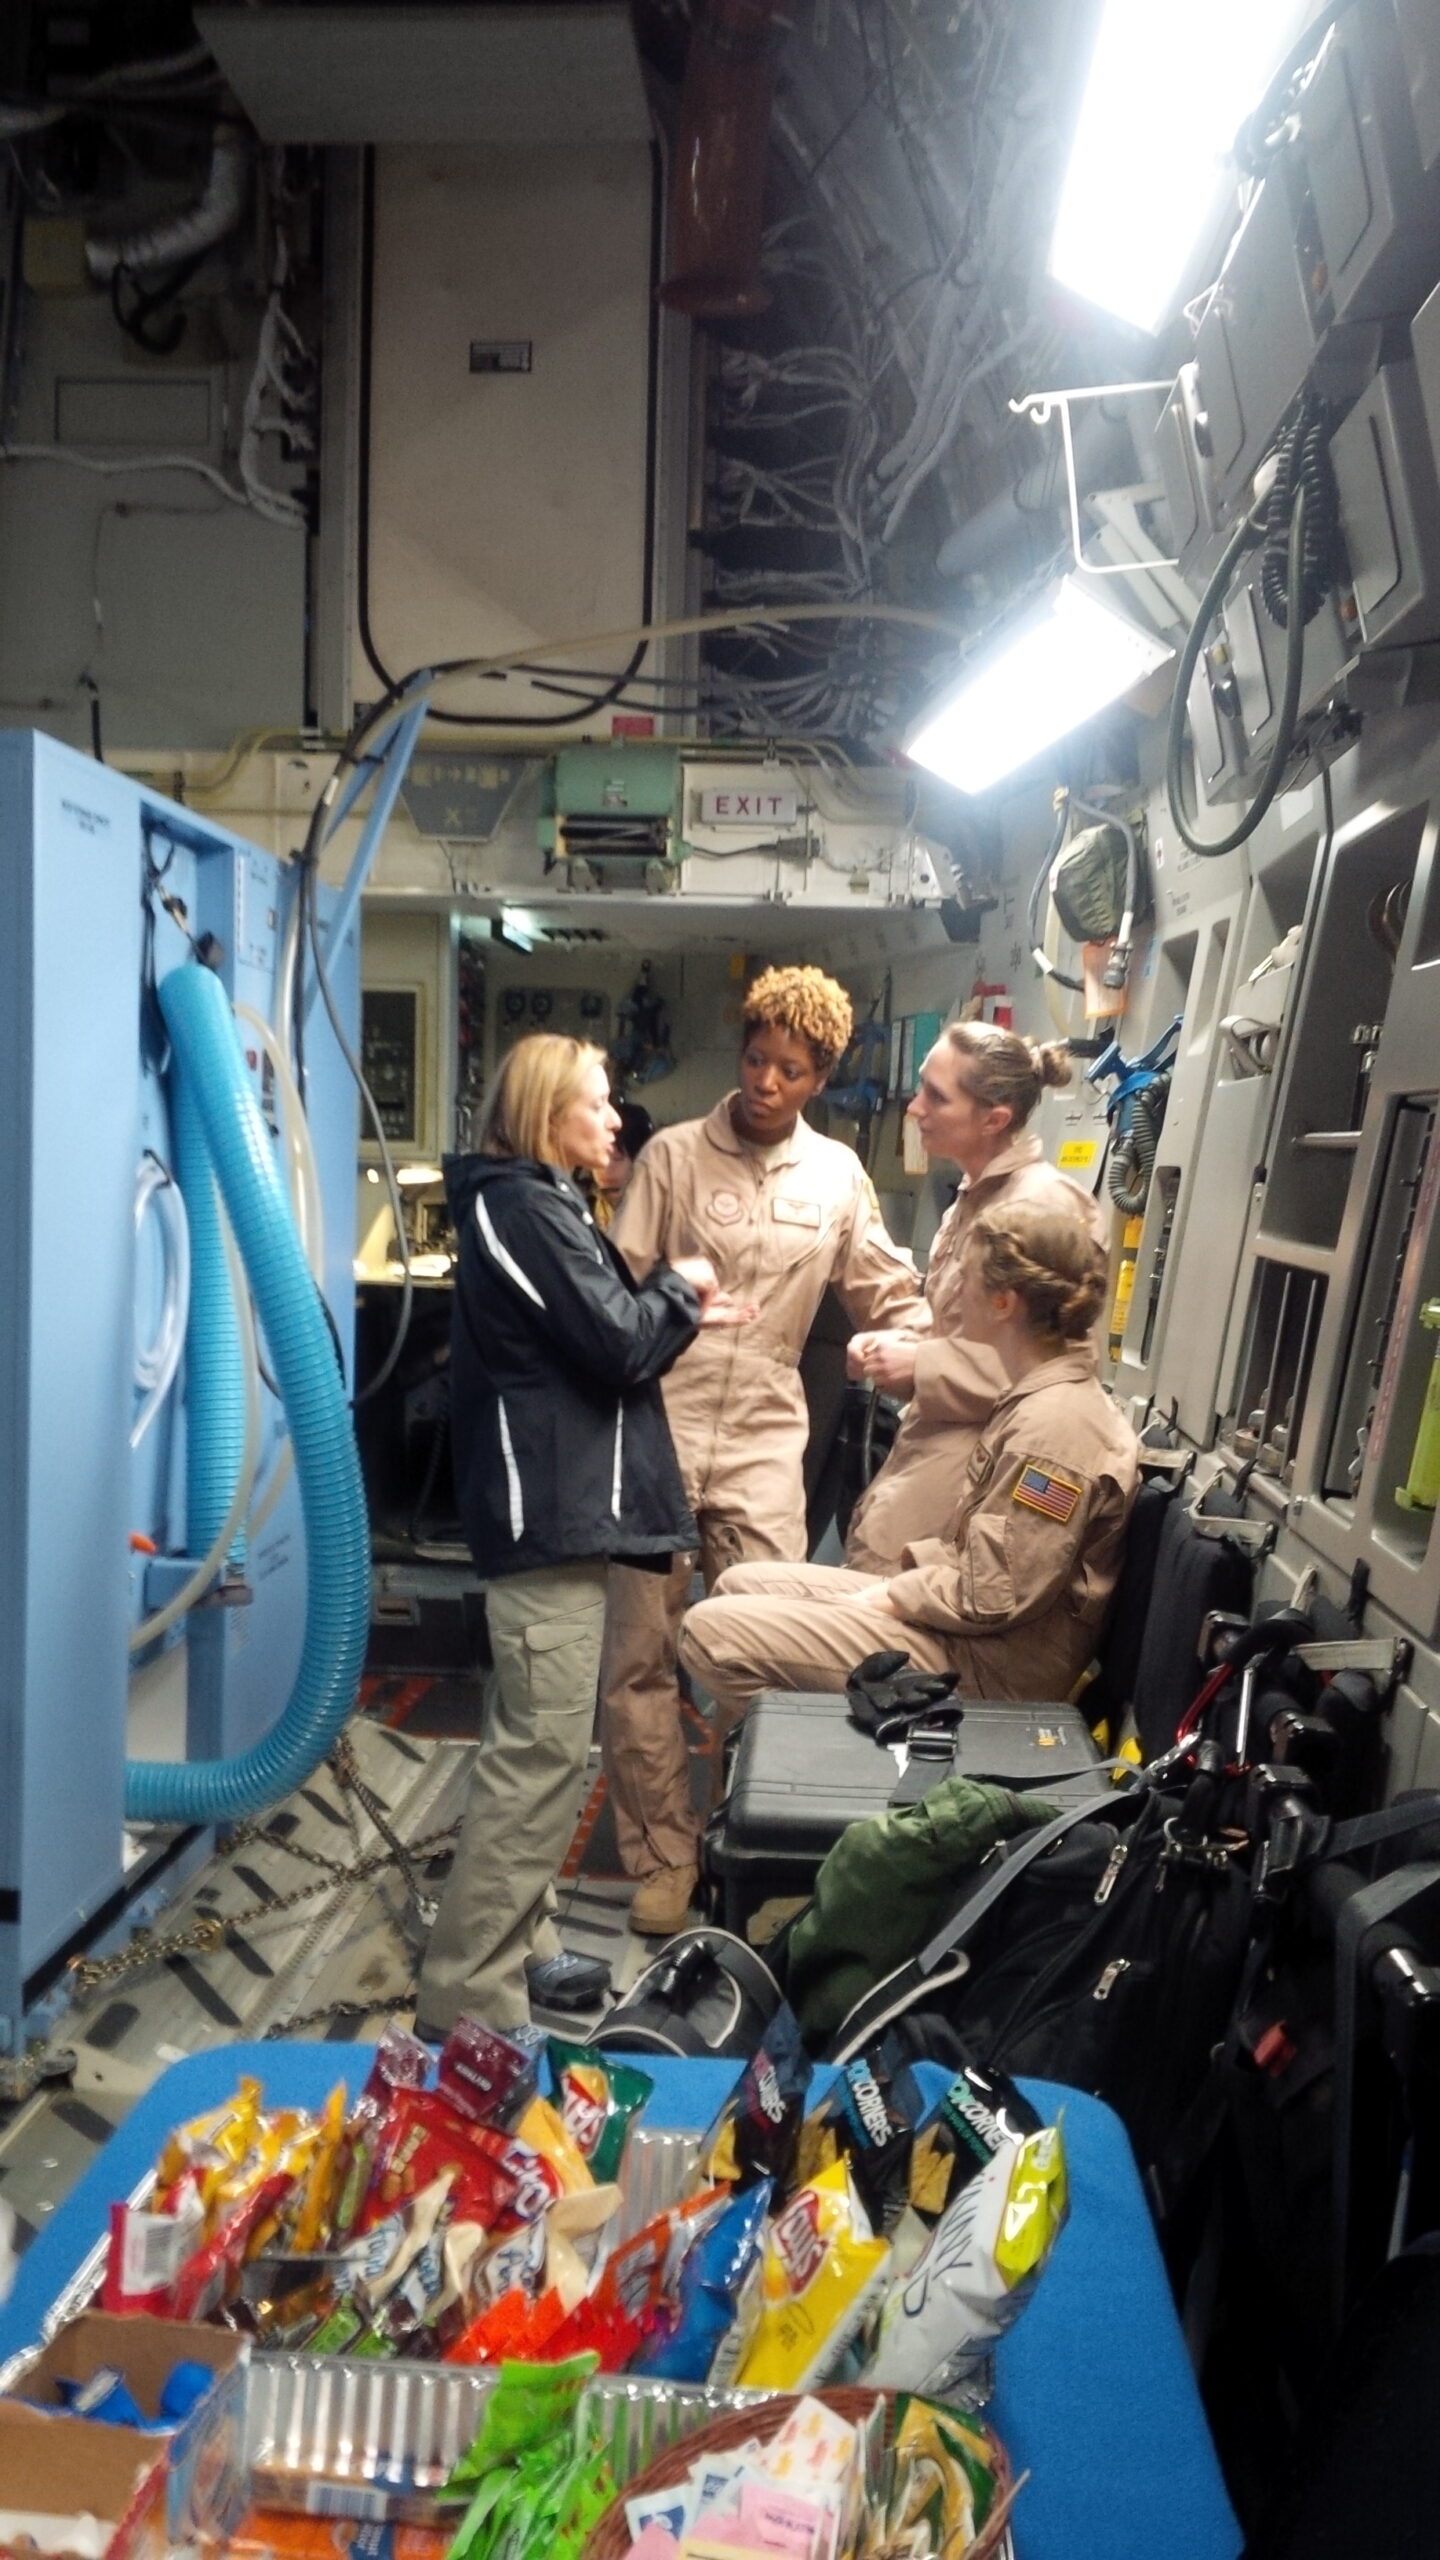 Corie Weathers meets with soldiers in what appears to be a bunker.